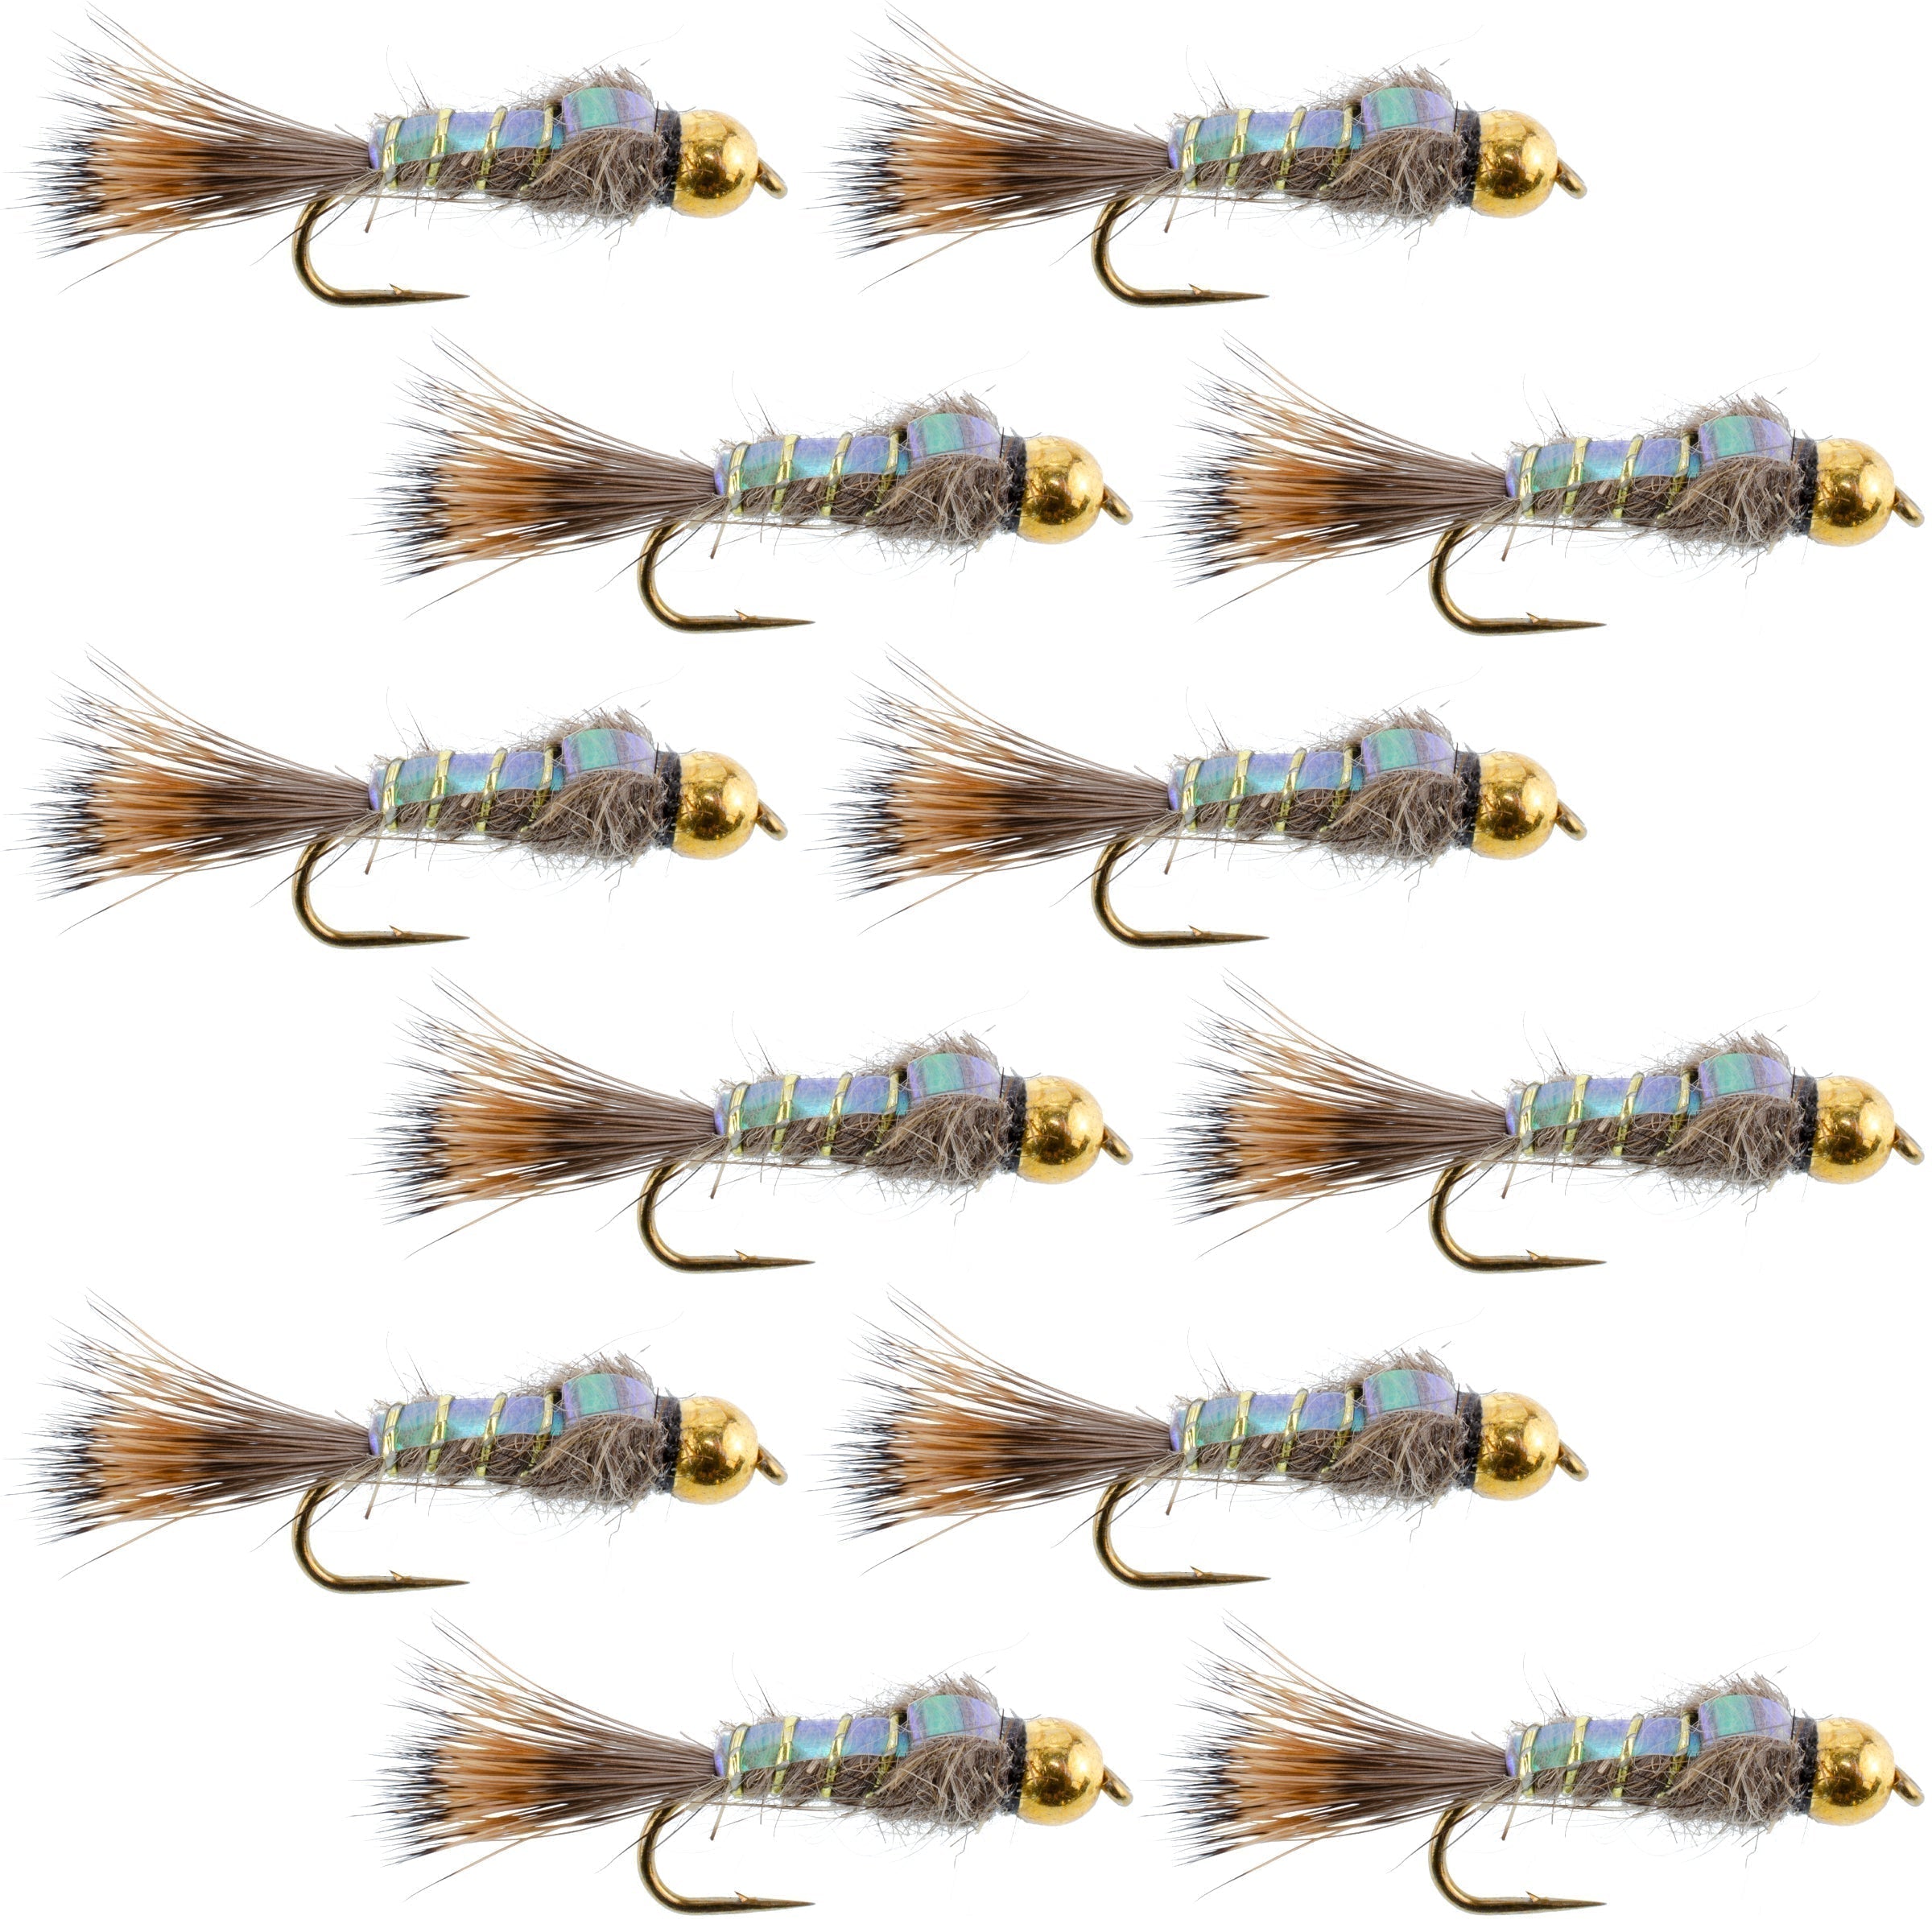 Tungsten Bead Flashback Gold Ribbed Hare's Ear Trout Fly 1 Dozen Nymph Wet Flies Size 14